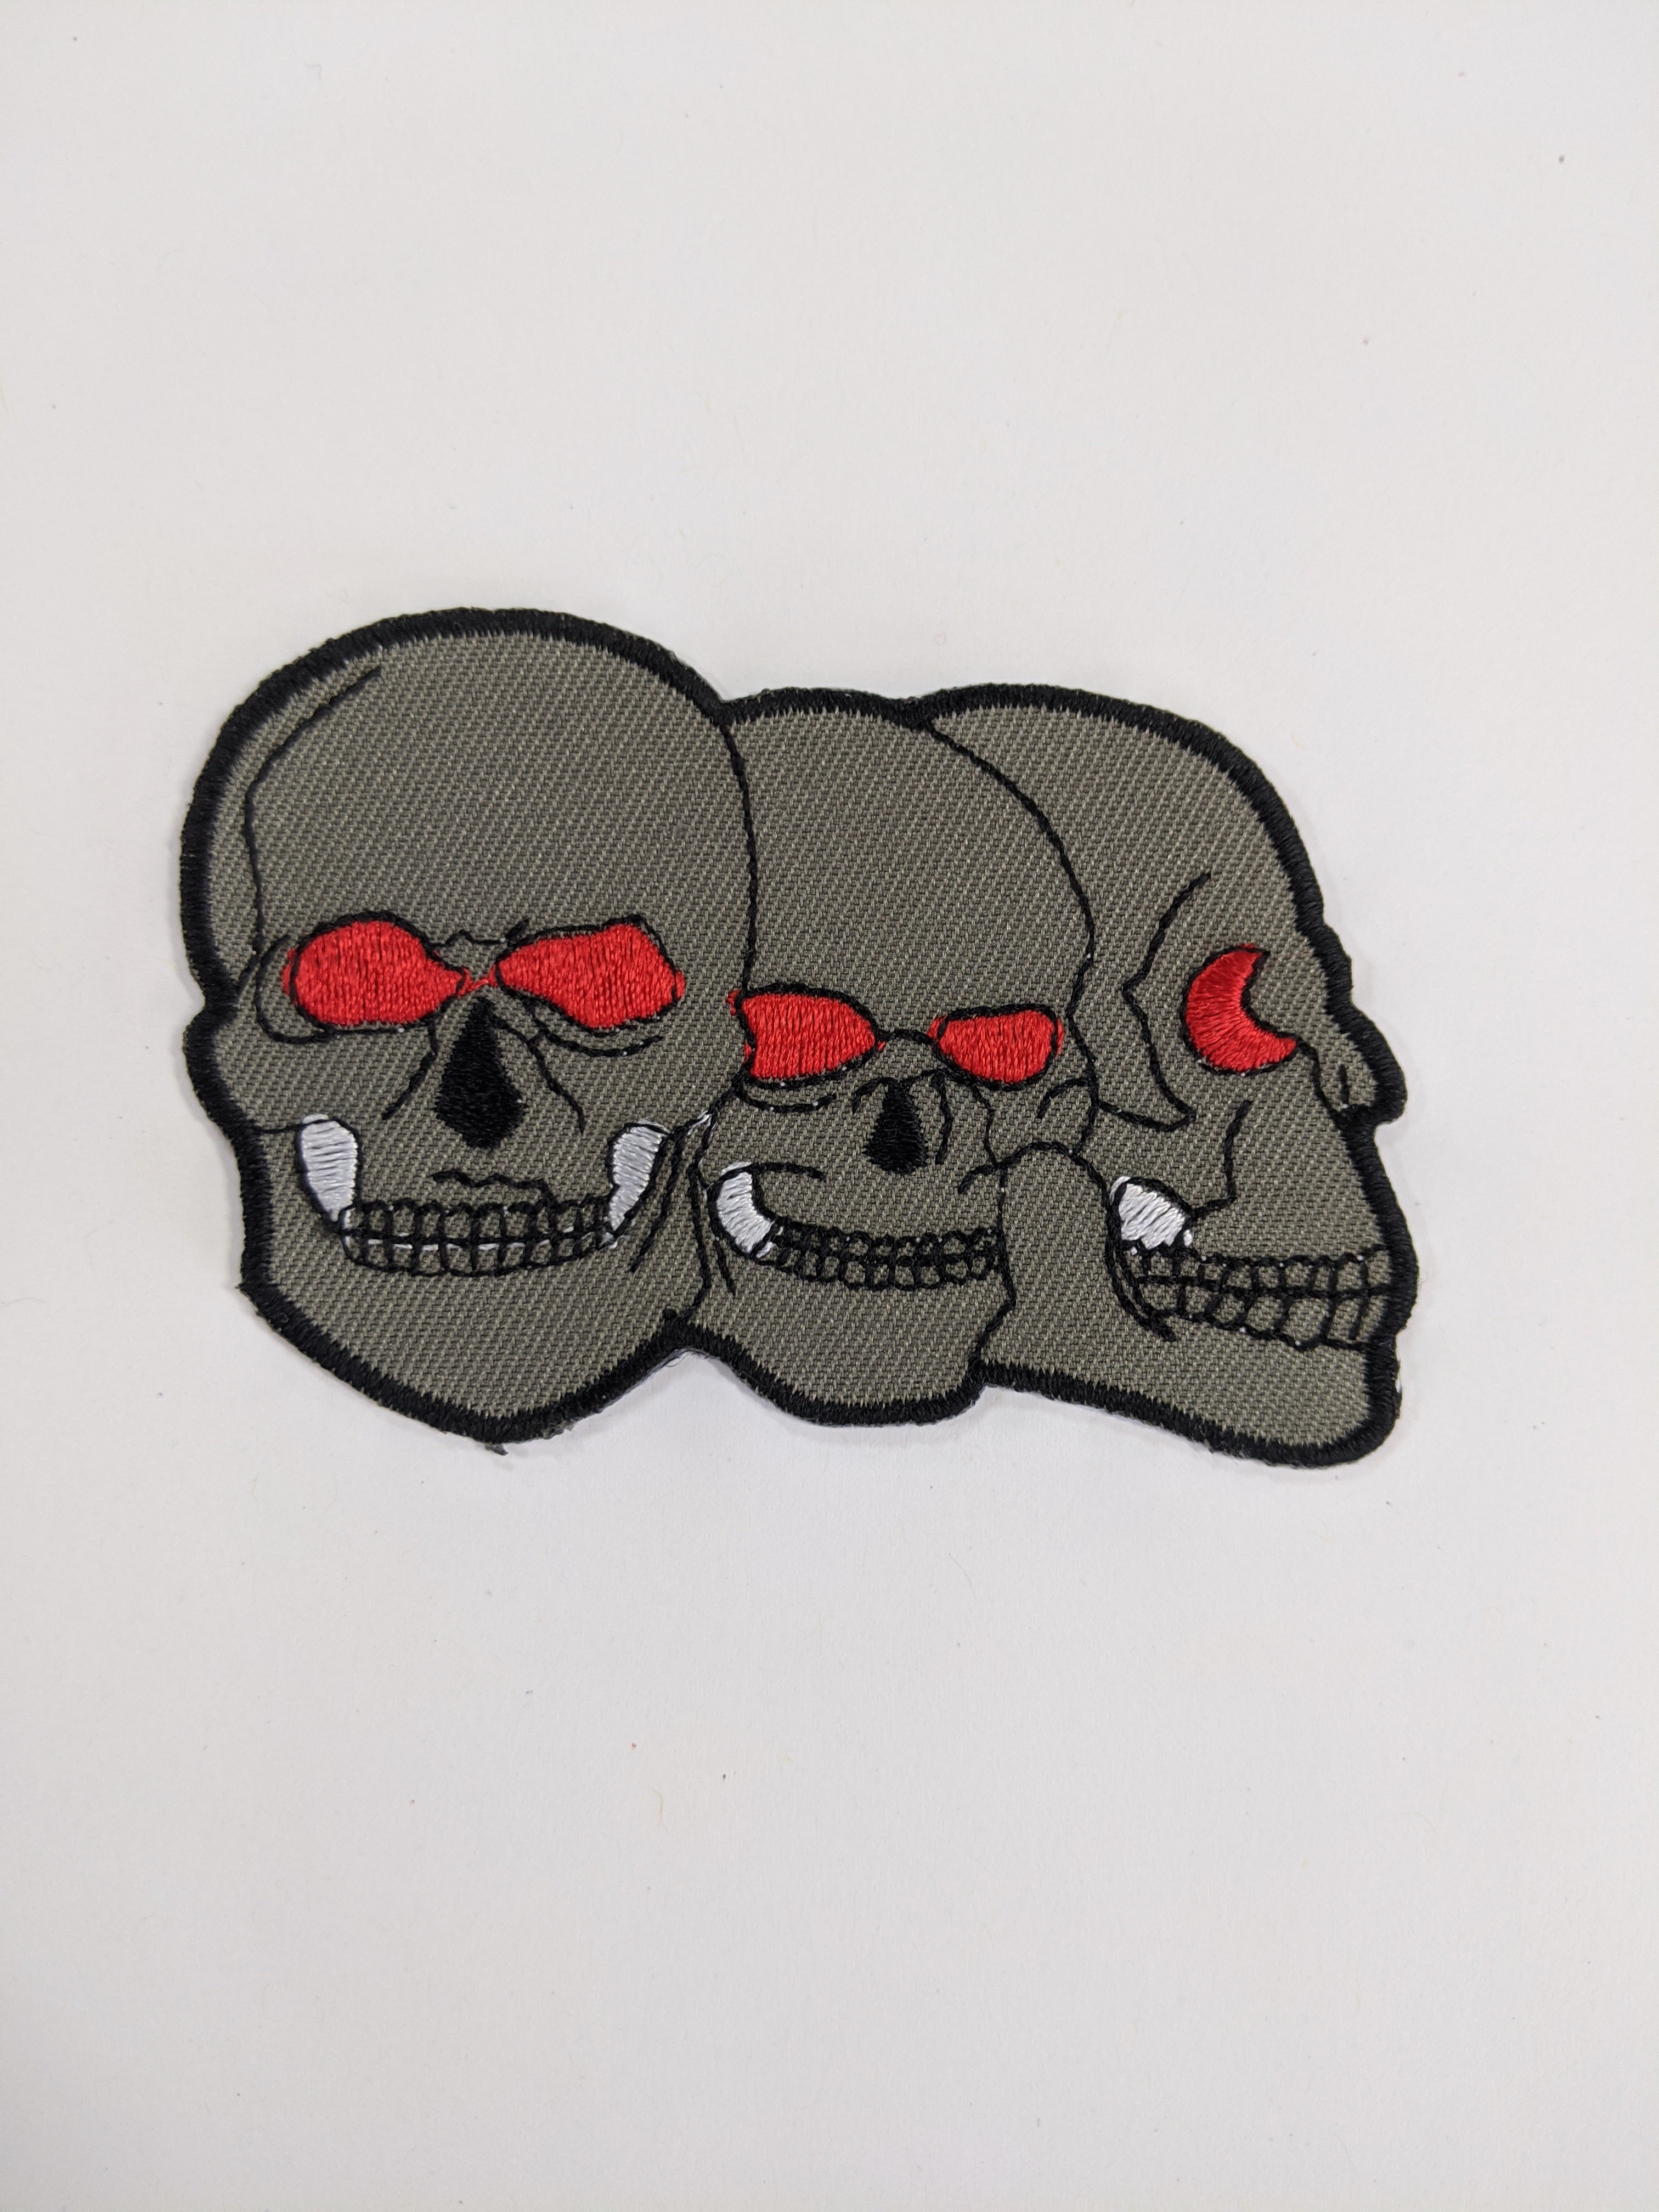 Skull patches